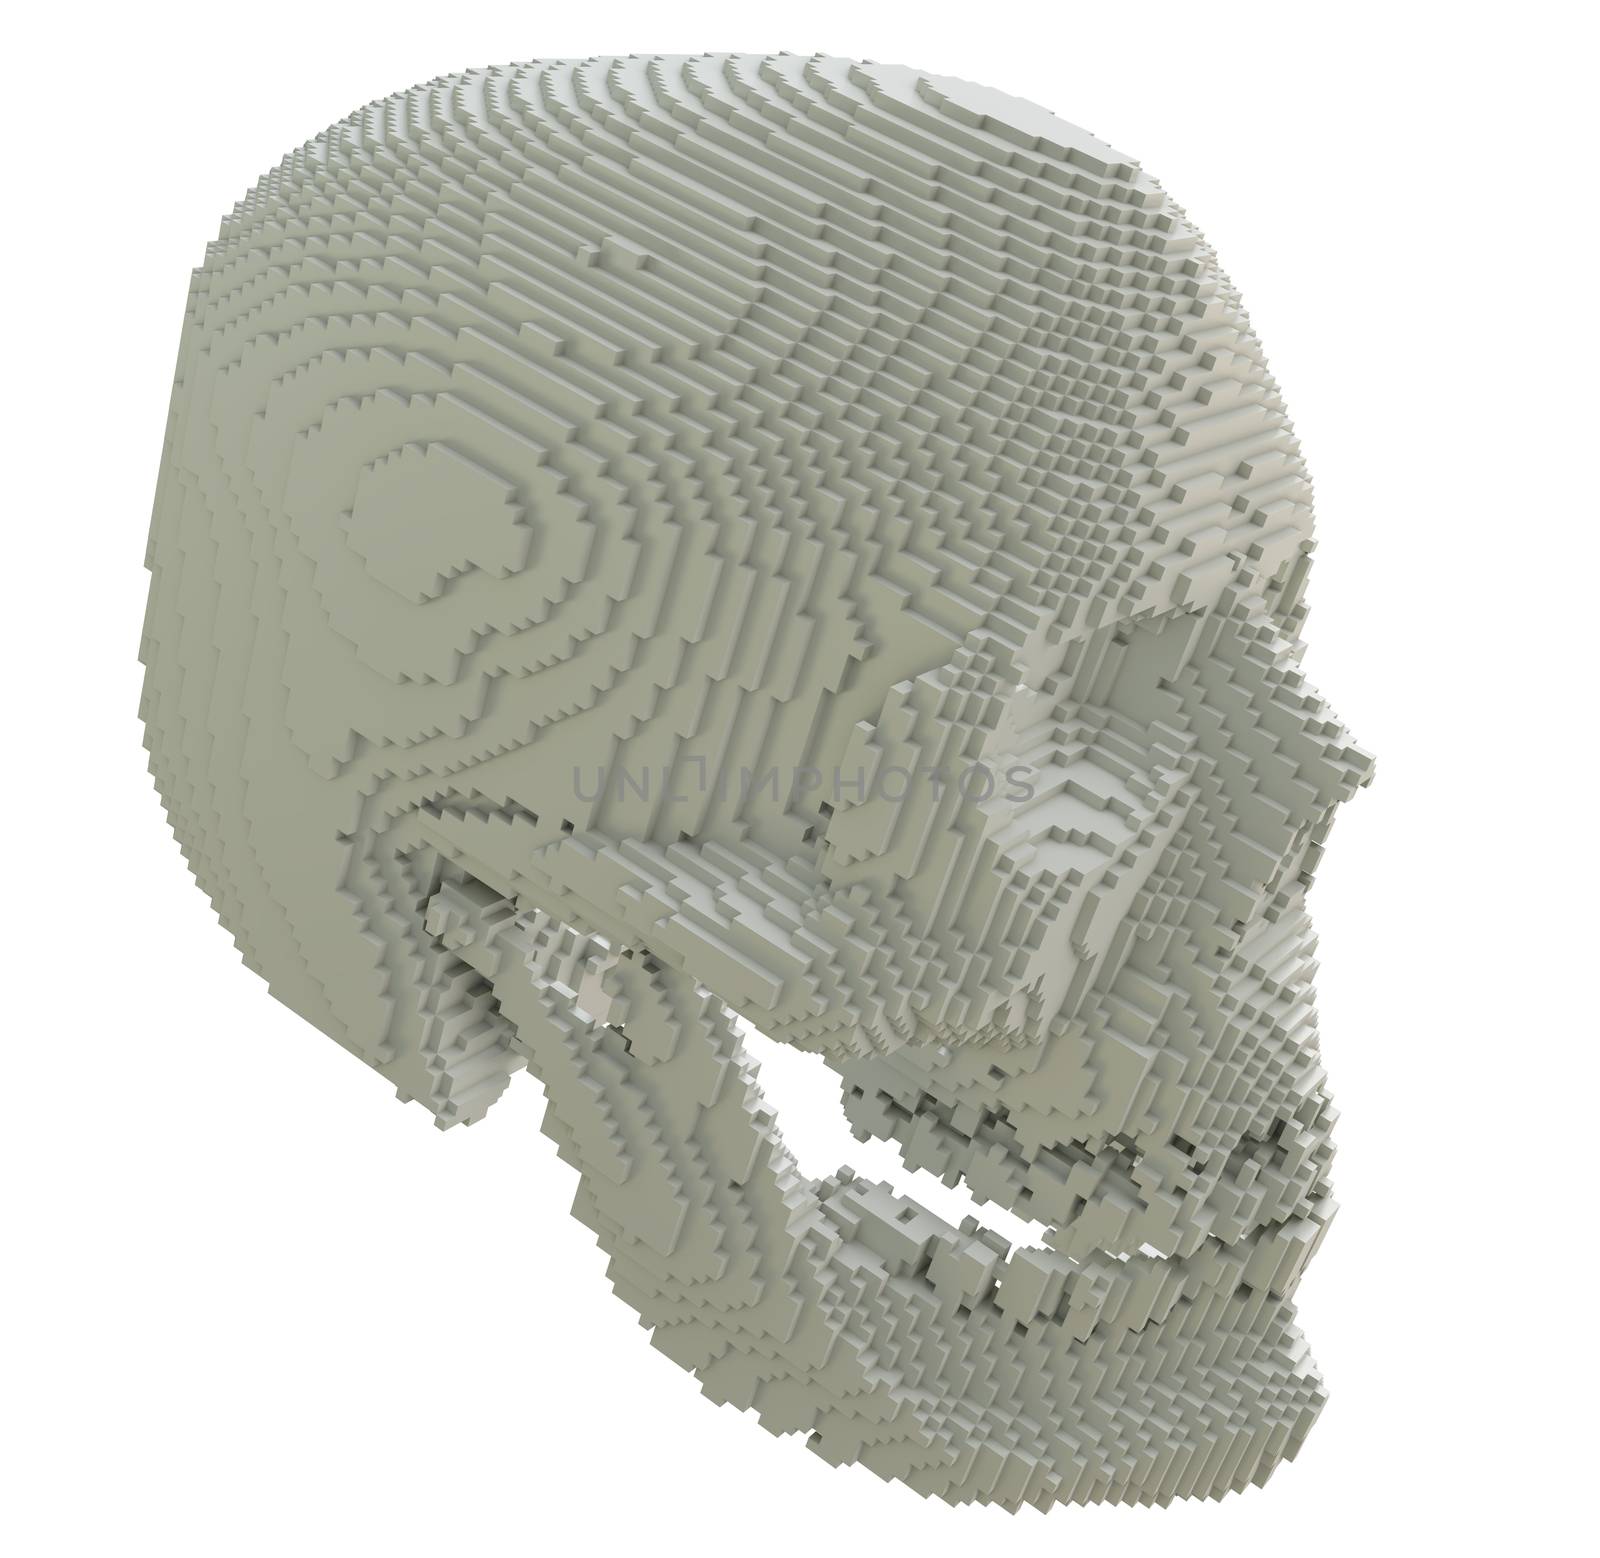 3d printed skull isolated by cherezoff